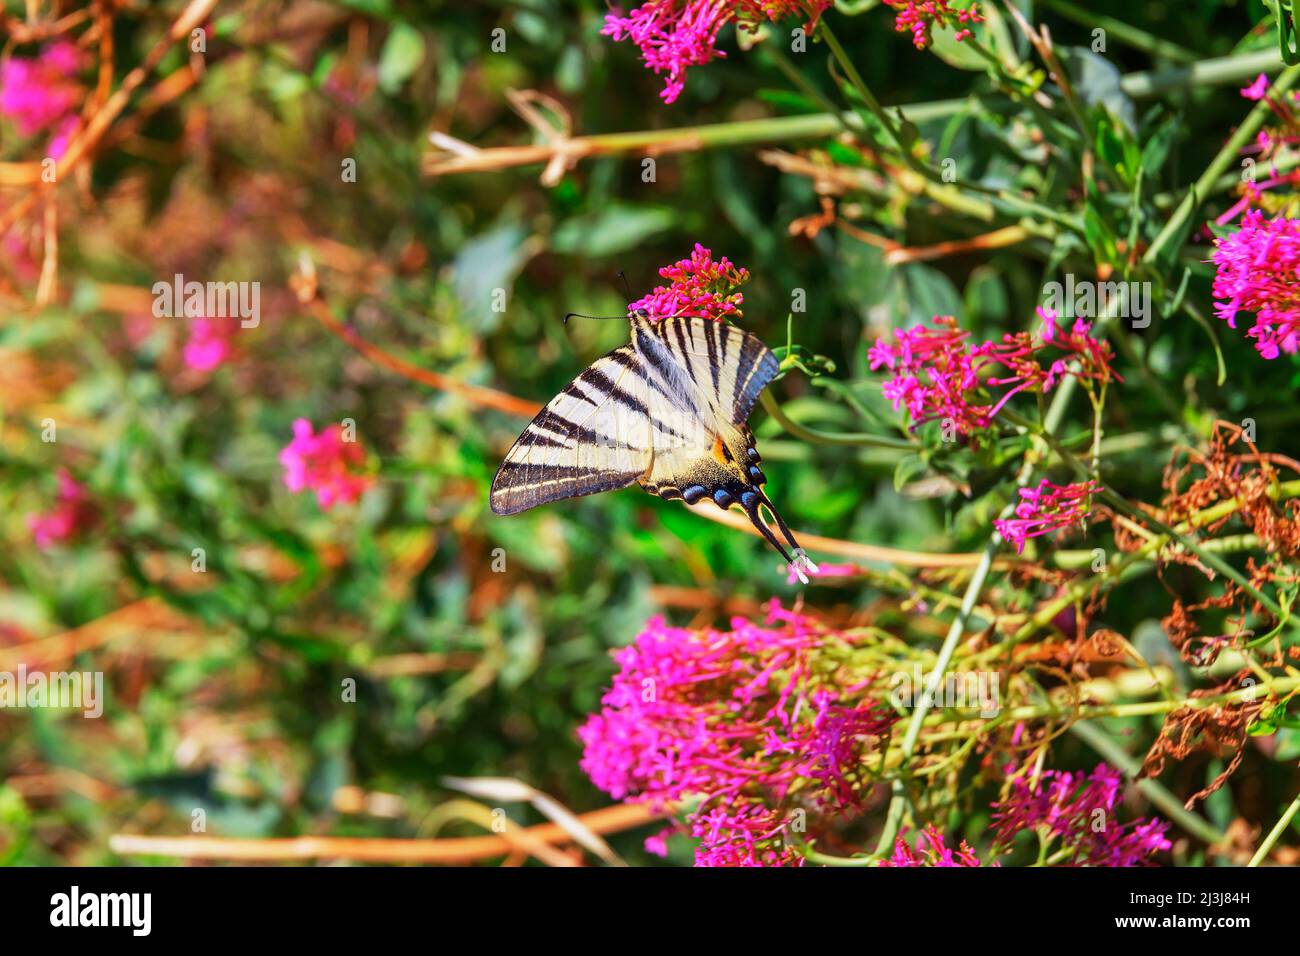 Scarce swallowtail butterfly (Iphiclides podalirius) flying over flowers, Vernazza, Cinque Terre, Liguria, Italy Stock Photo